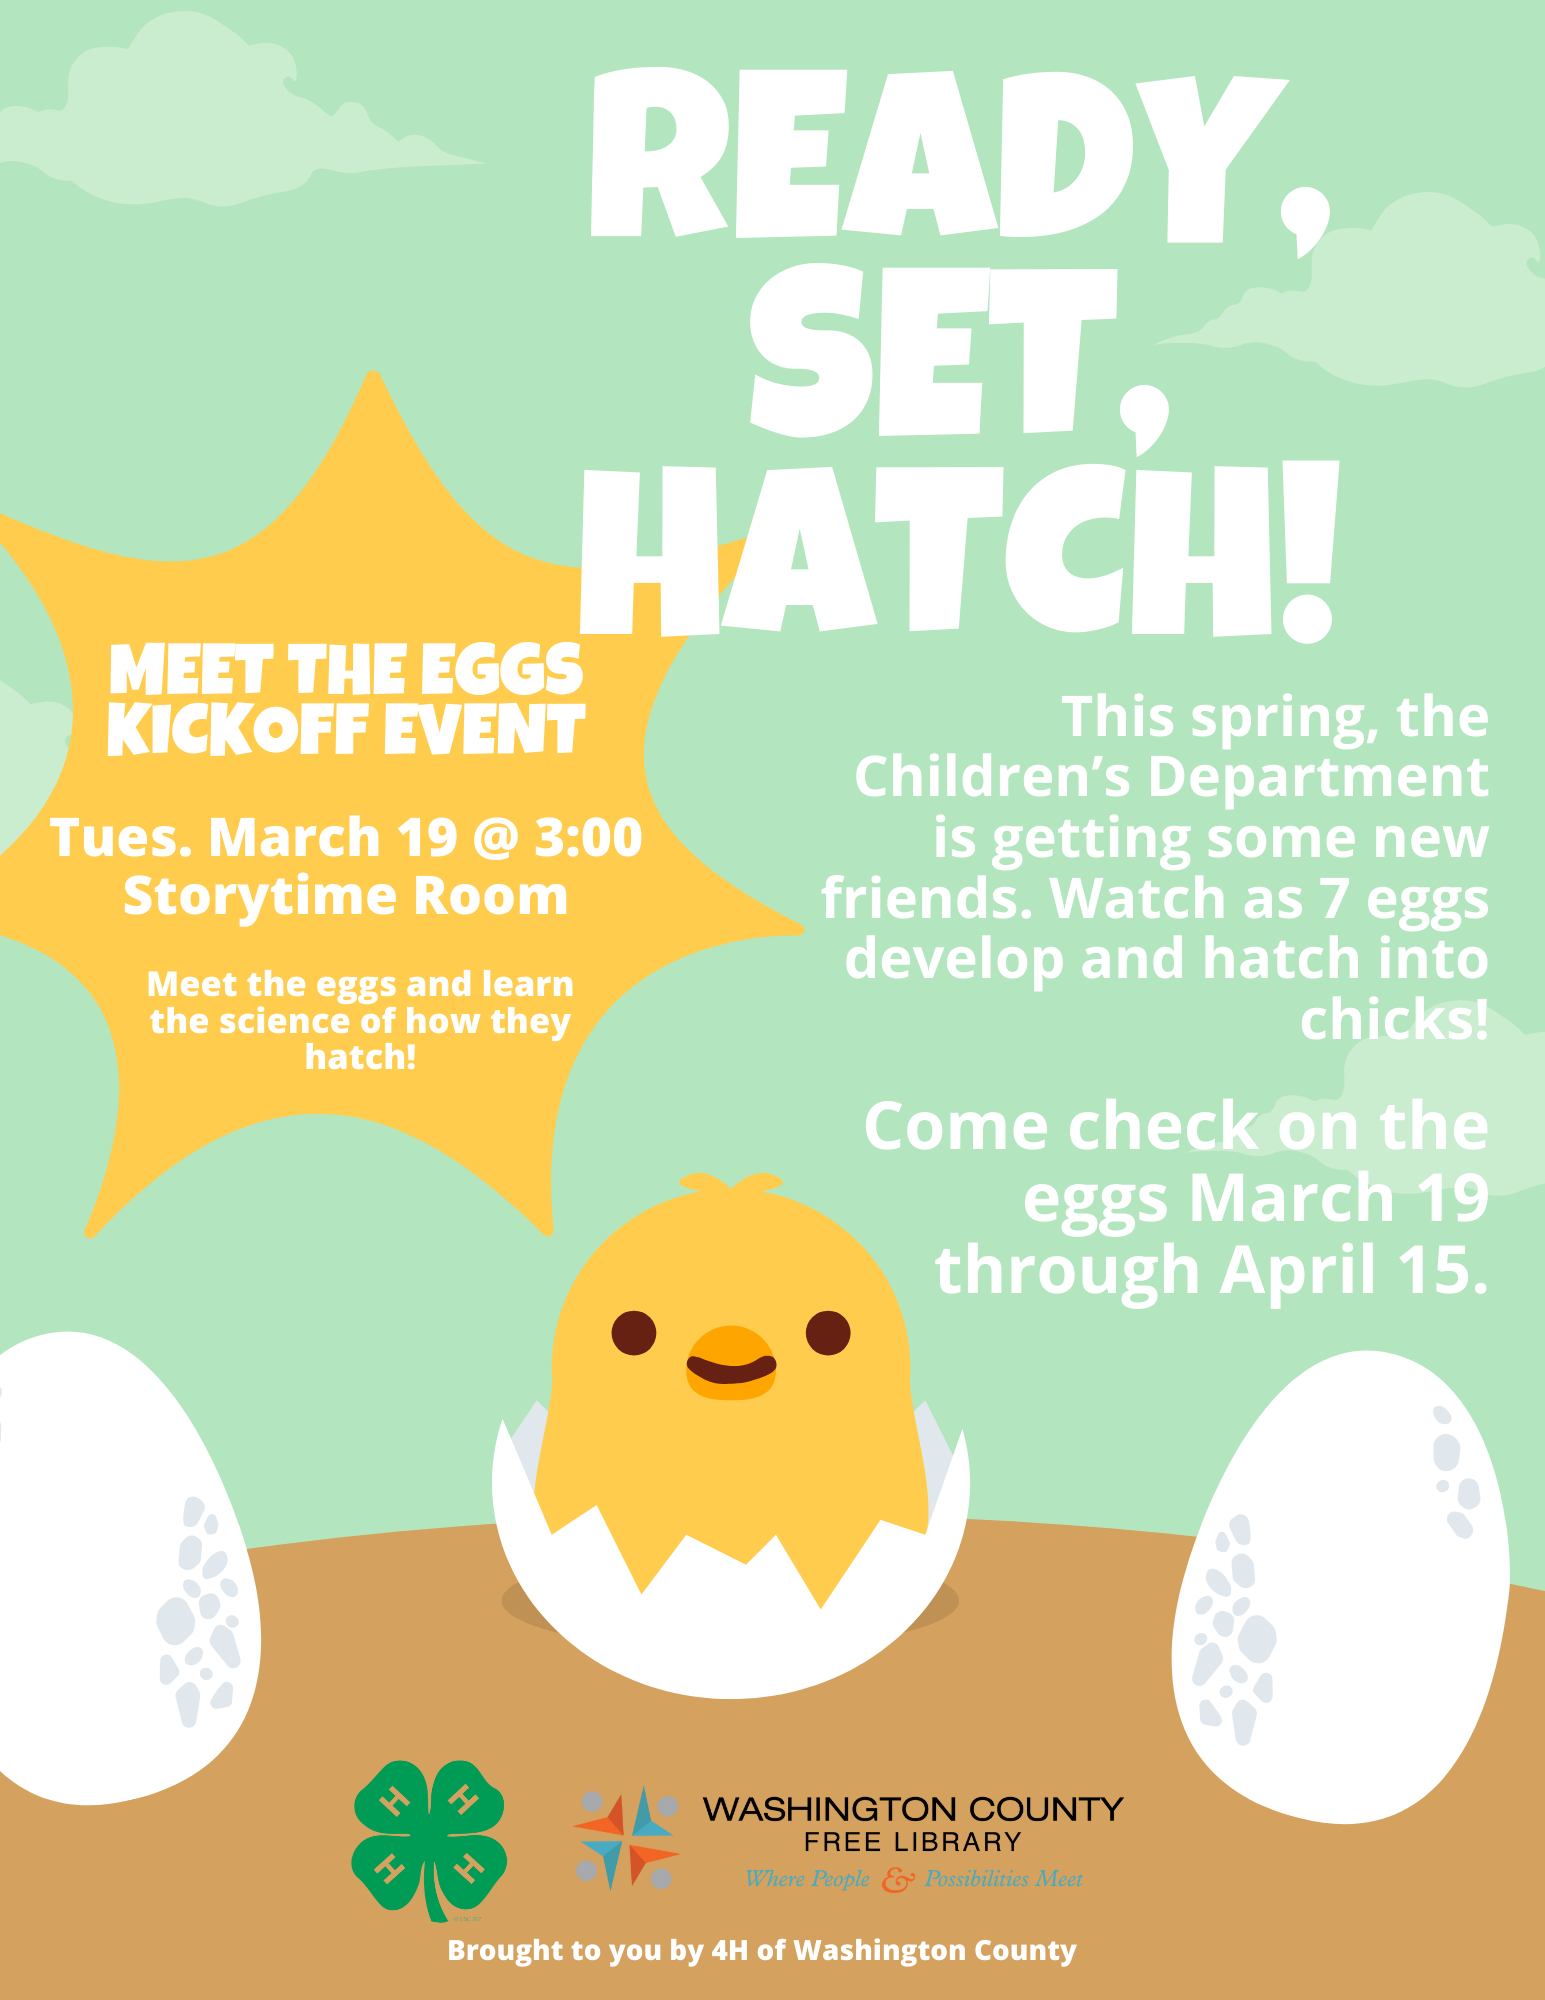 Two eggs rest dormant on the lower left and right corners. Betwixt them, alas! A cracked egg with a baby chick emerging, a smile on his tiny new face. The poster shares the following information "Ready, Set, Hatch! This spring, the Children's Department is getting some new friends. Watch as 7 eggs develop and hatch into chicks! Come check on the eggs March 19 through April 15. Meet the Eggs Kickoff Event: Tuesday, March 19 at 3:00 in the Storytime Room. Meet the eggs and learn the science of how they hatch.